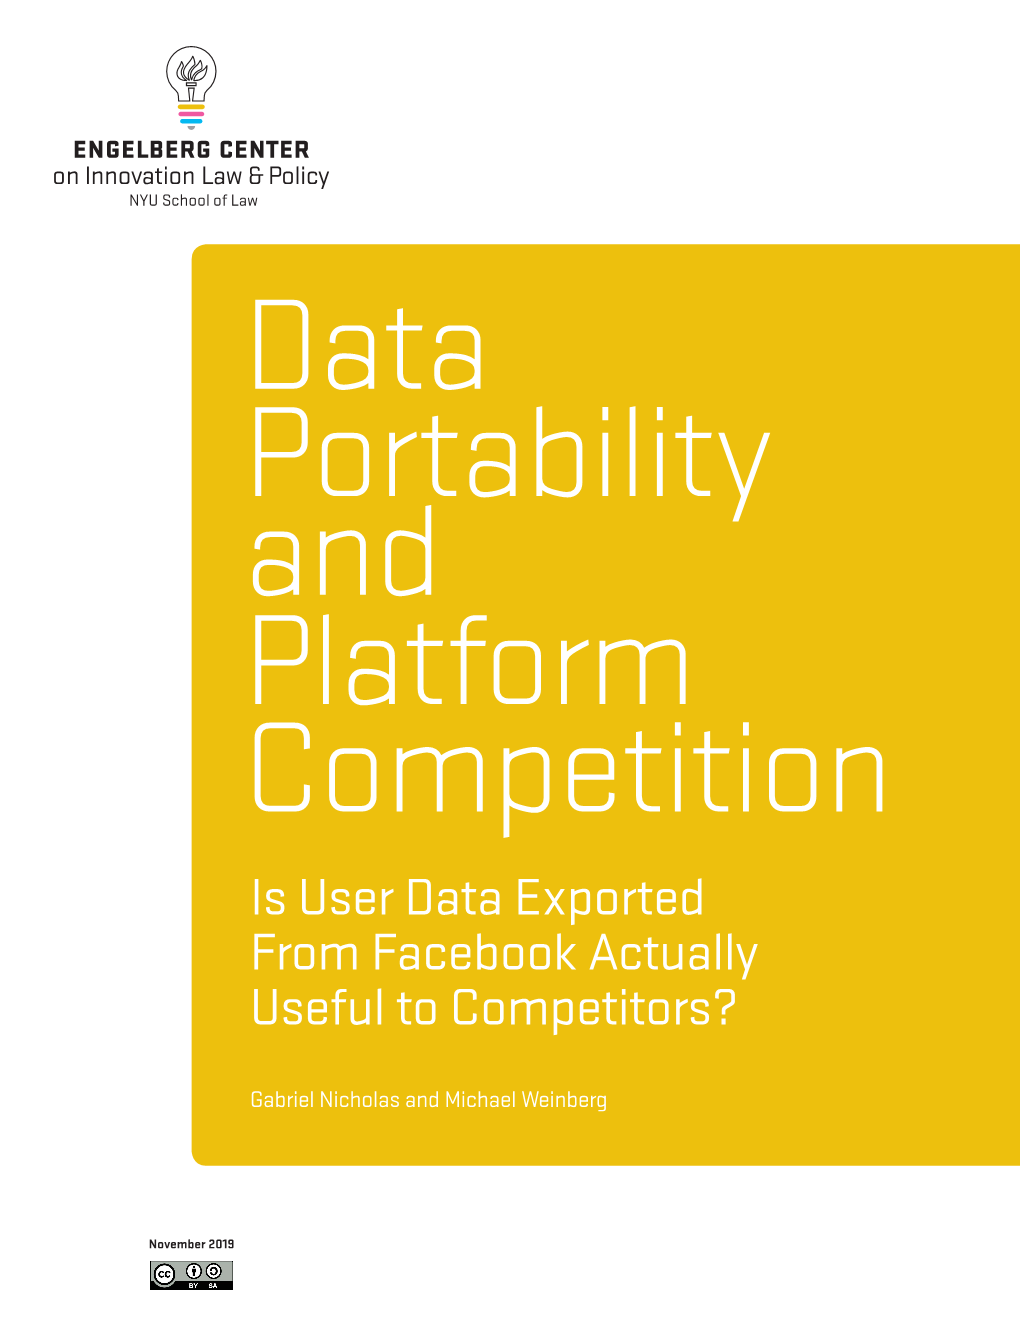 Data Portability and Platform Competition: Is User Data Exported from Facebook Actually Useful to Competitors?